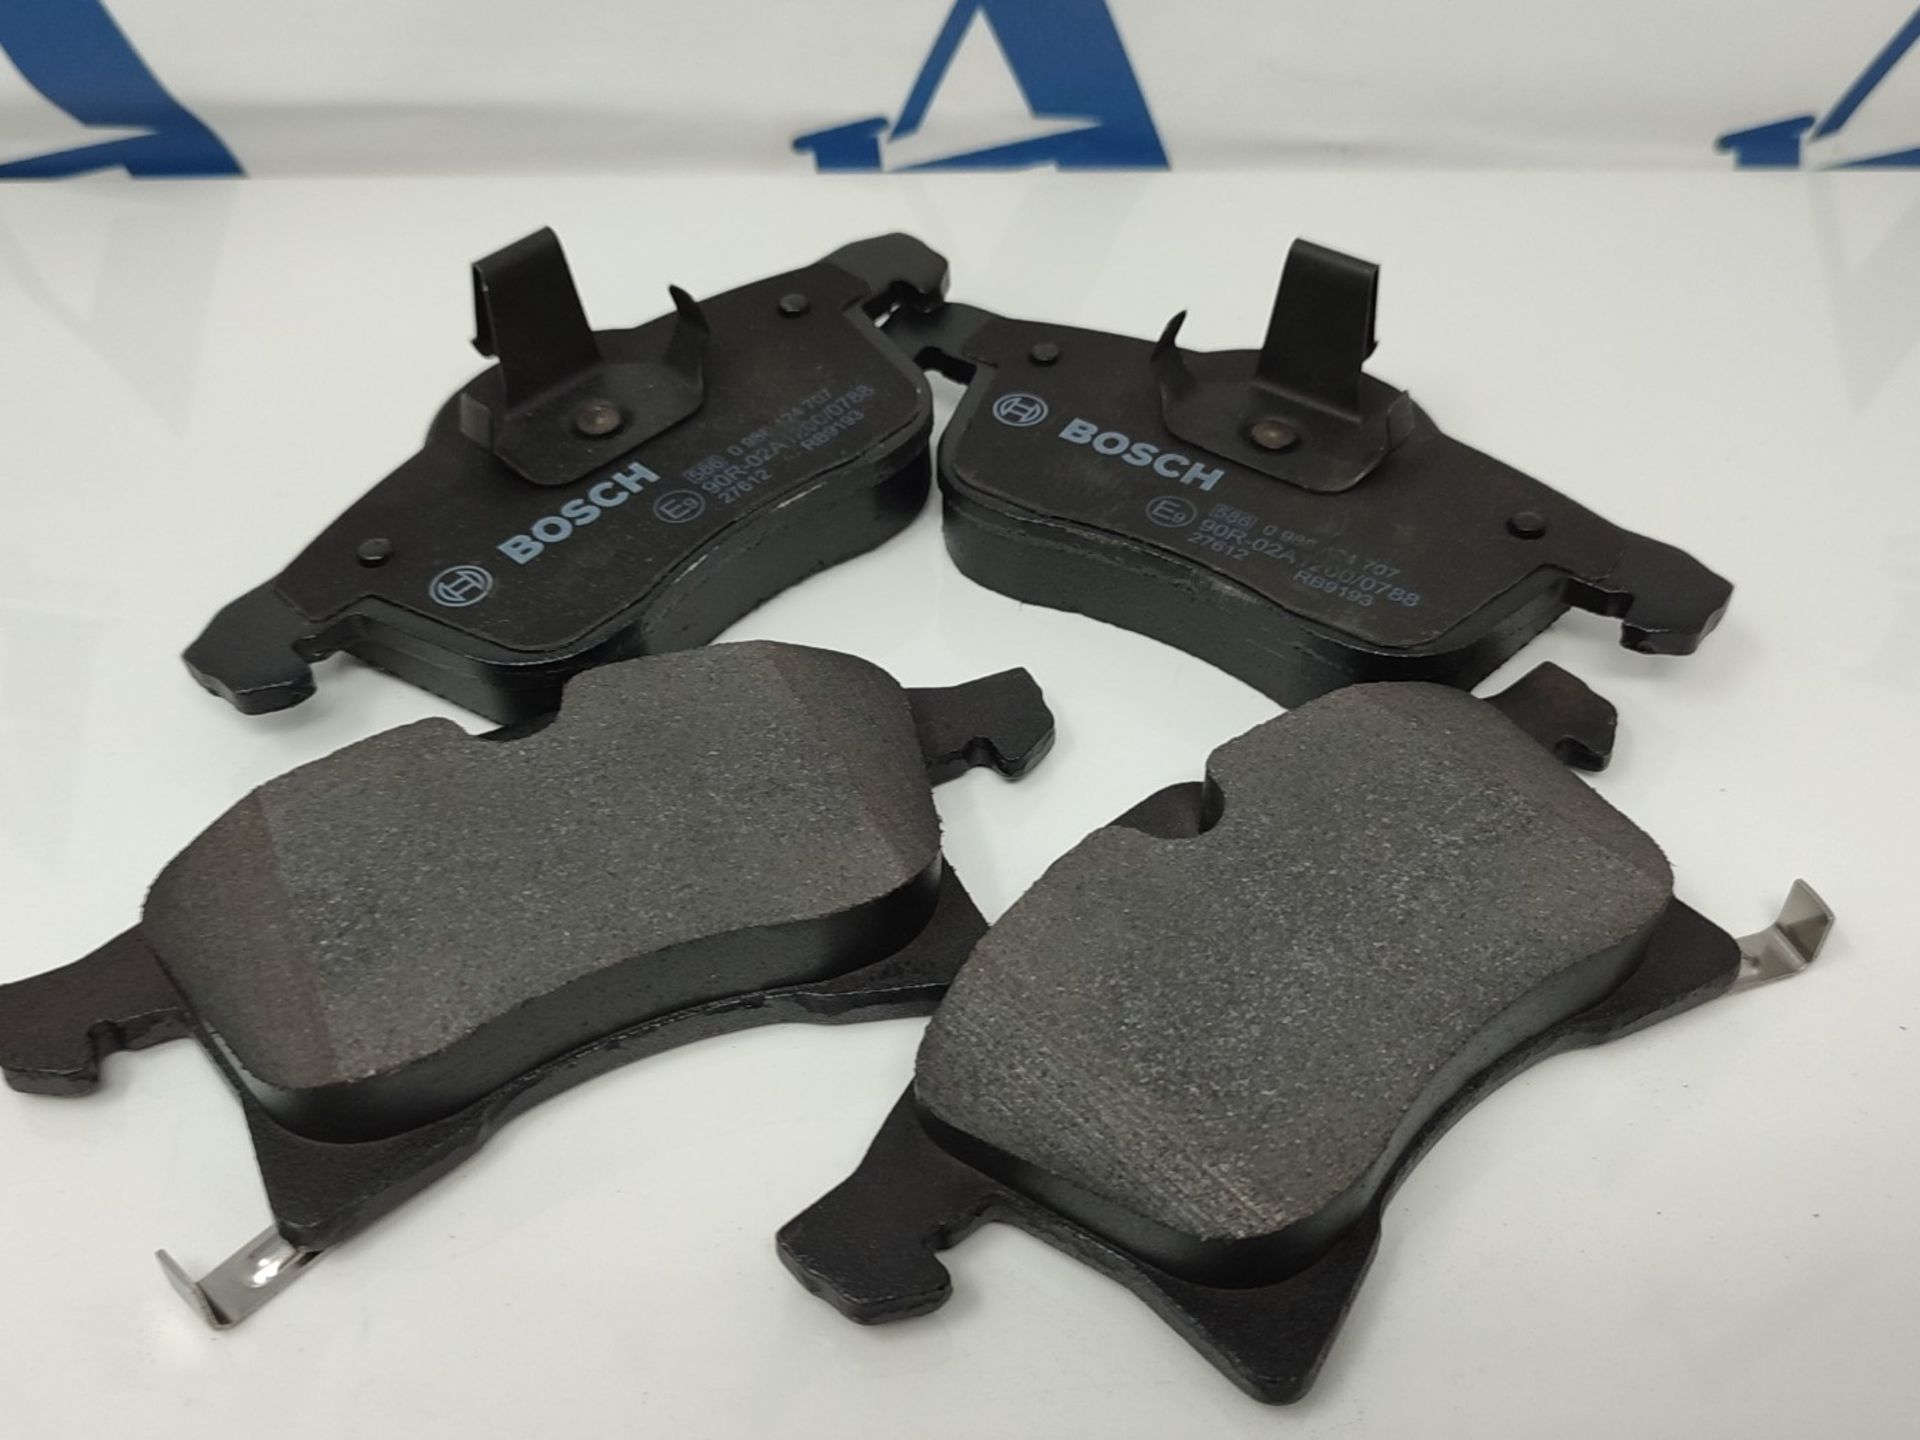 Bosch BP420 Brake Pads - Front Axle - ECE-R90 Certified - 1 Set of 4 Pads - Image 2 of 2